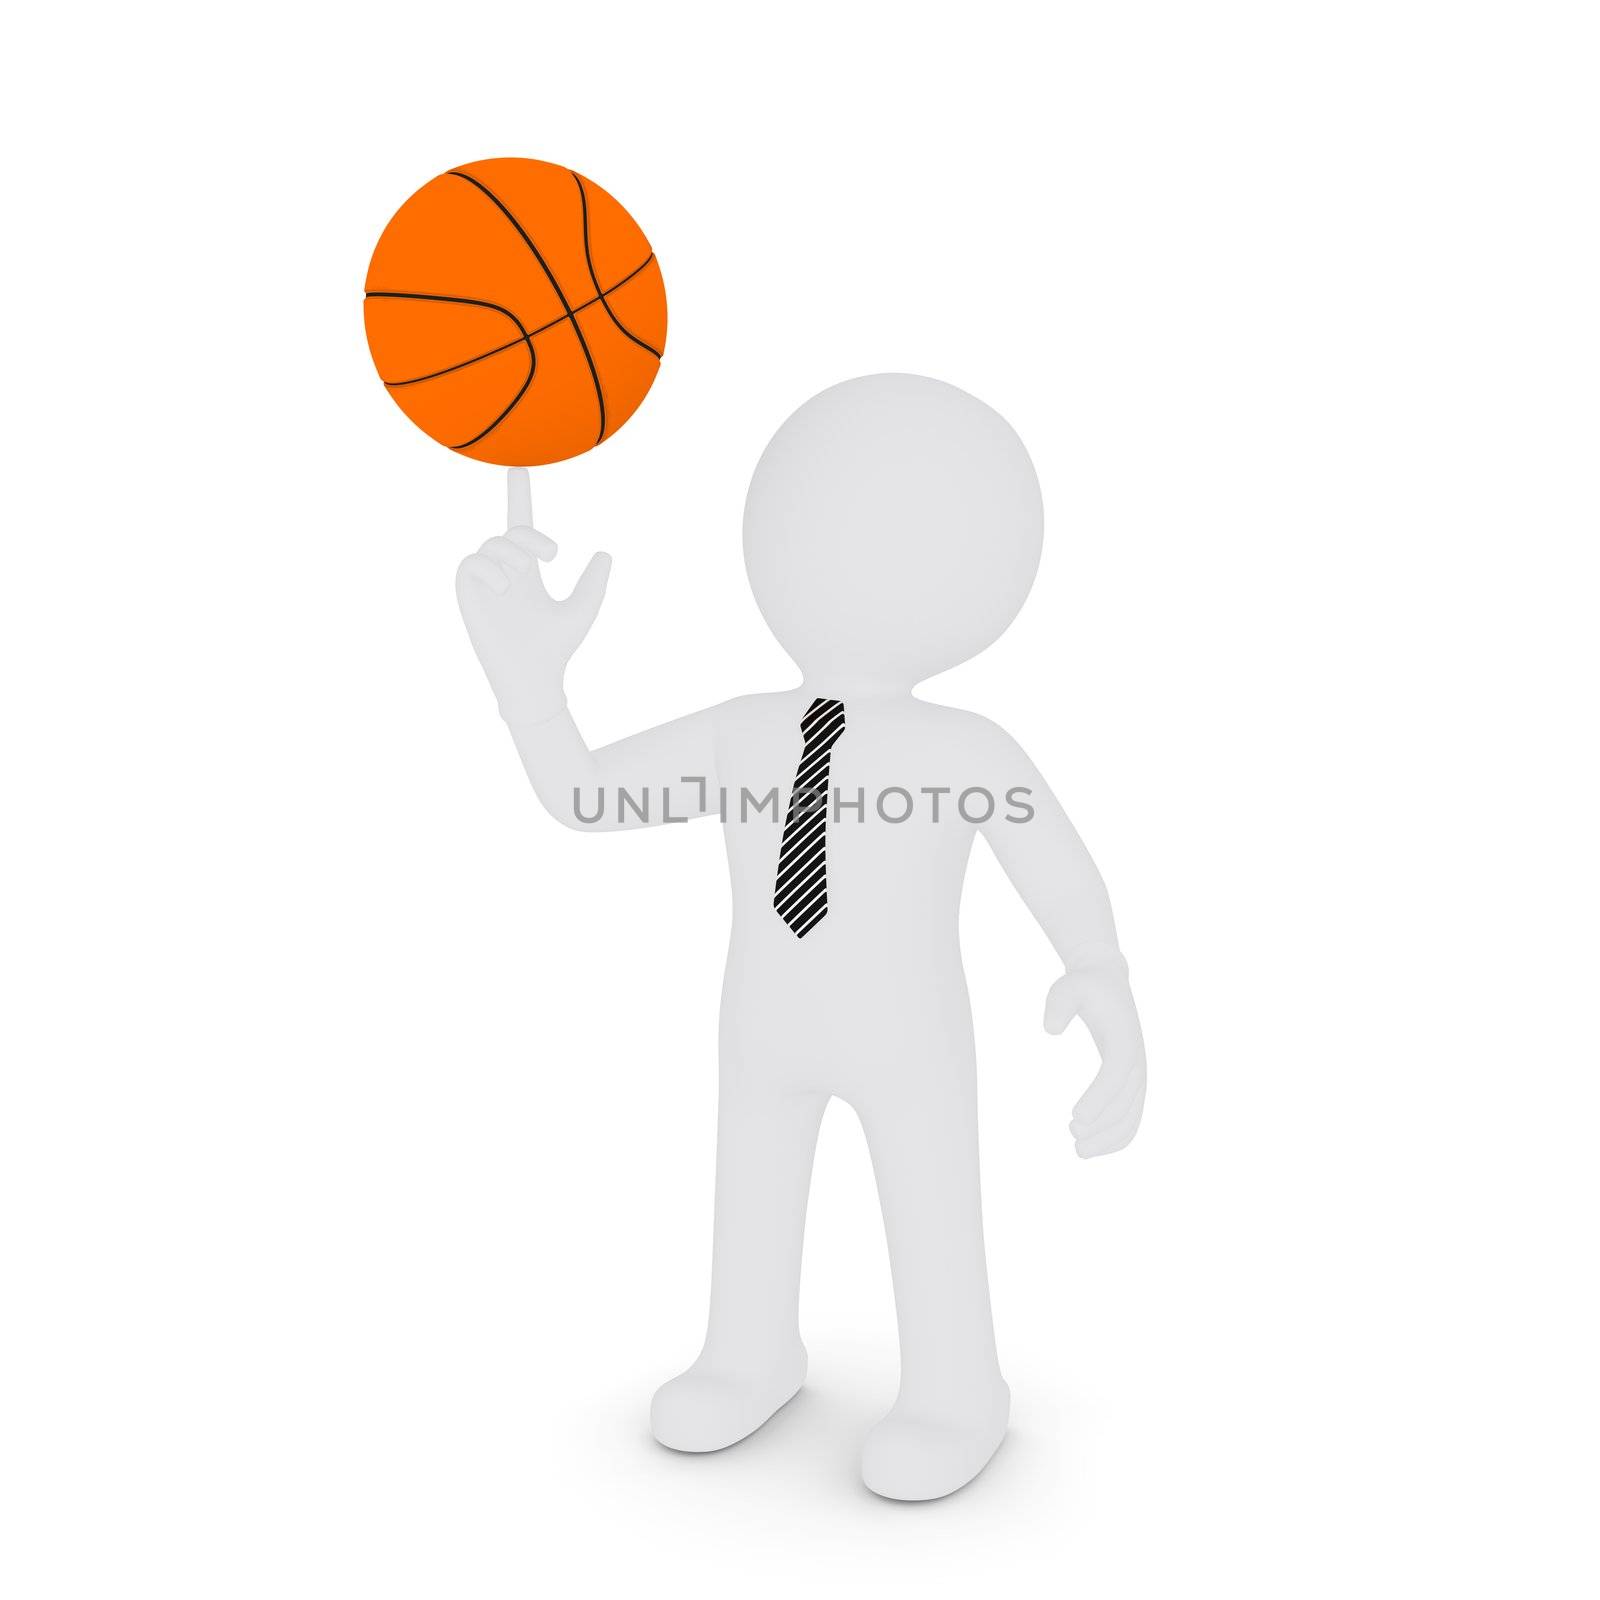 The white man keeps his finger on a basketball. Isolated on white background